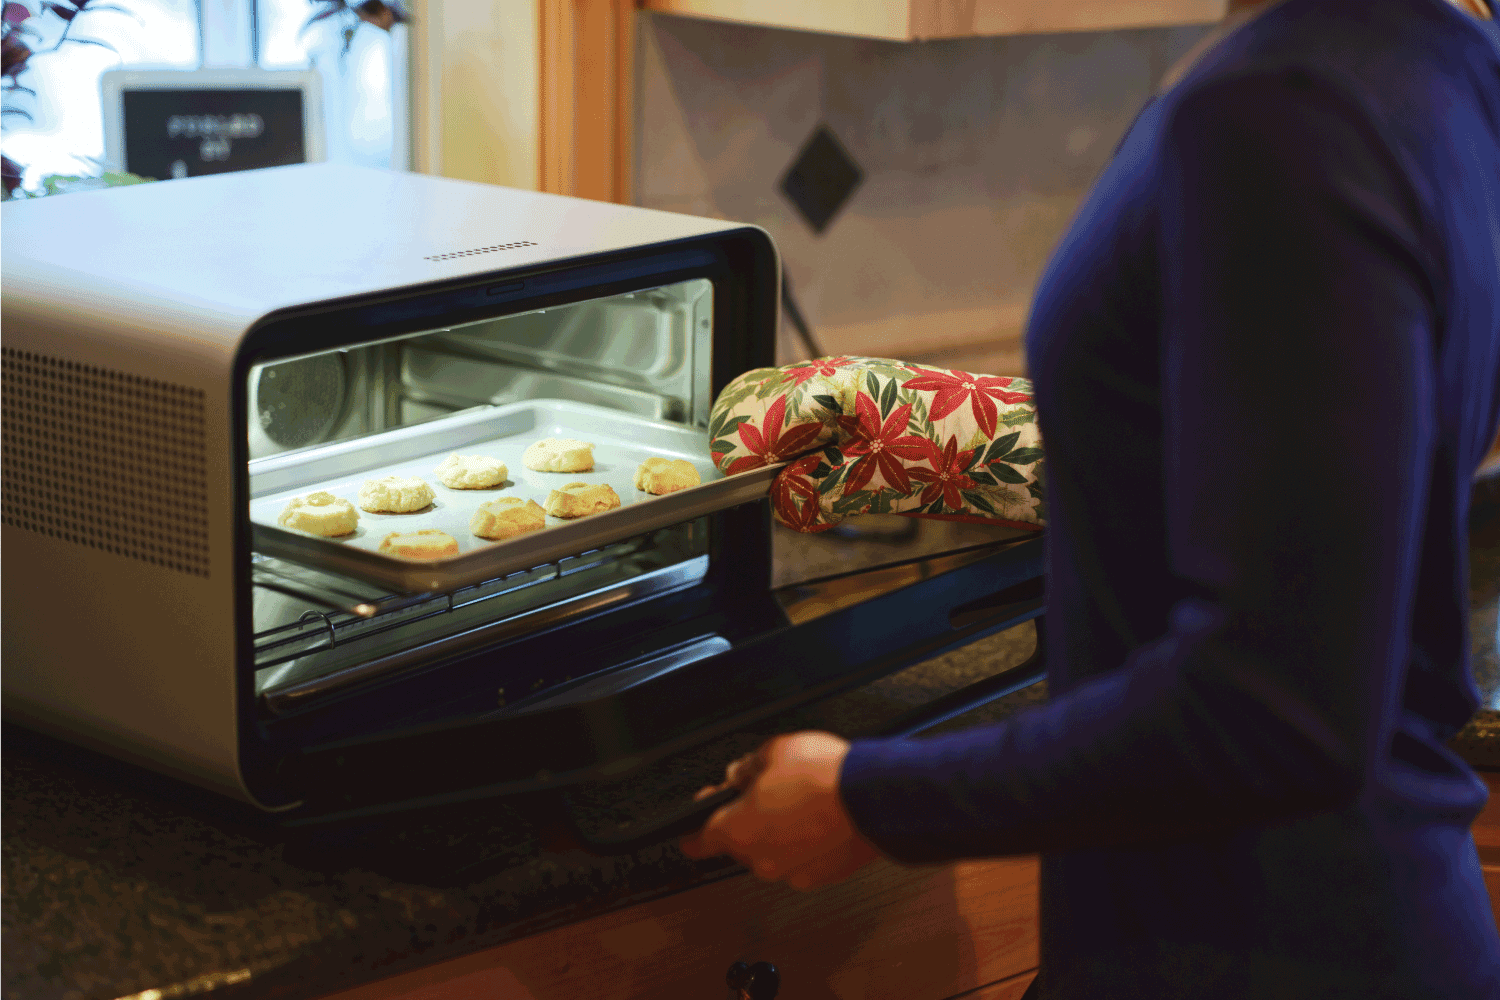 A woman using a countertop oven in her home kitchen.